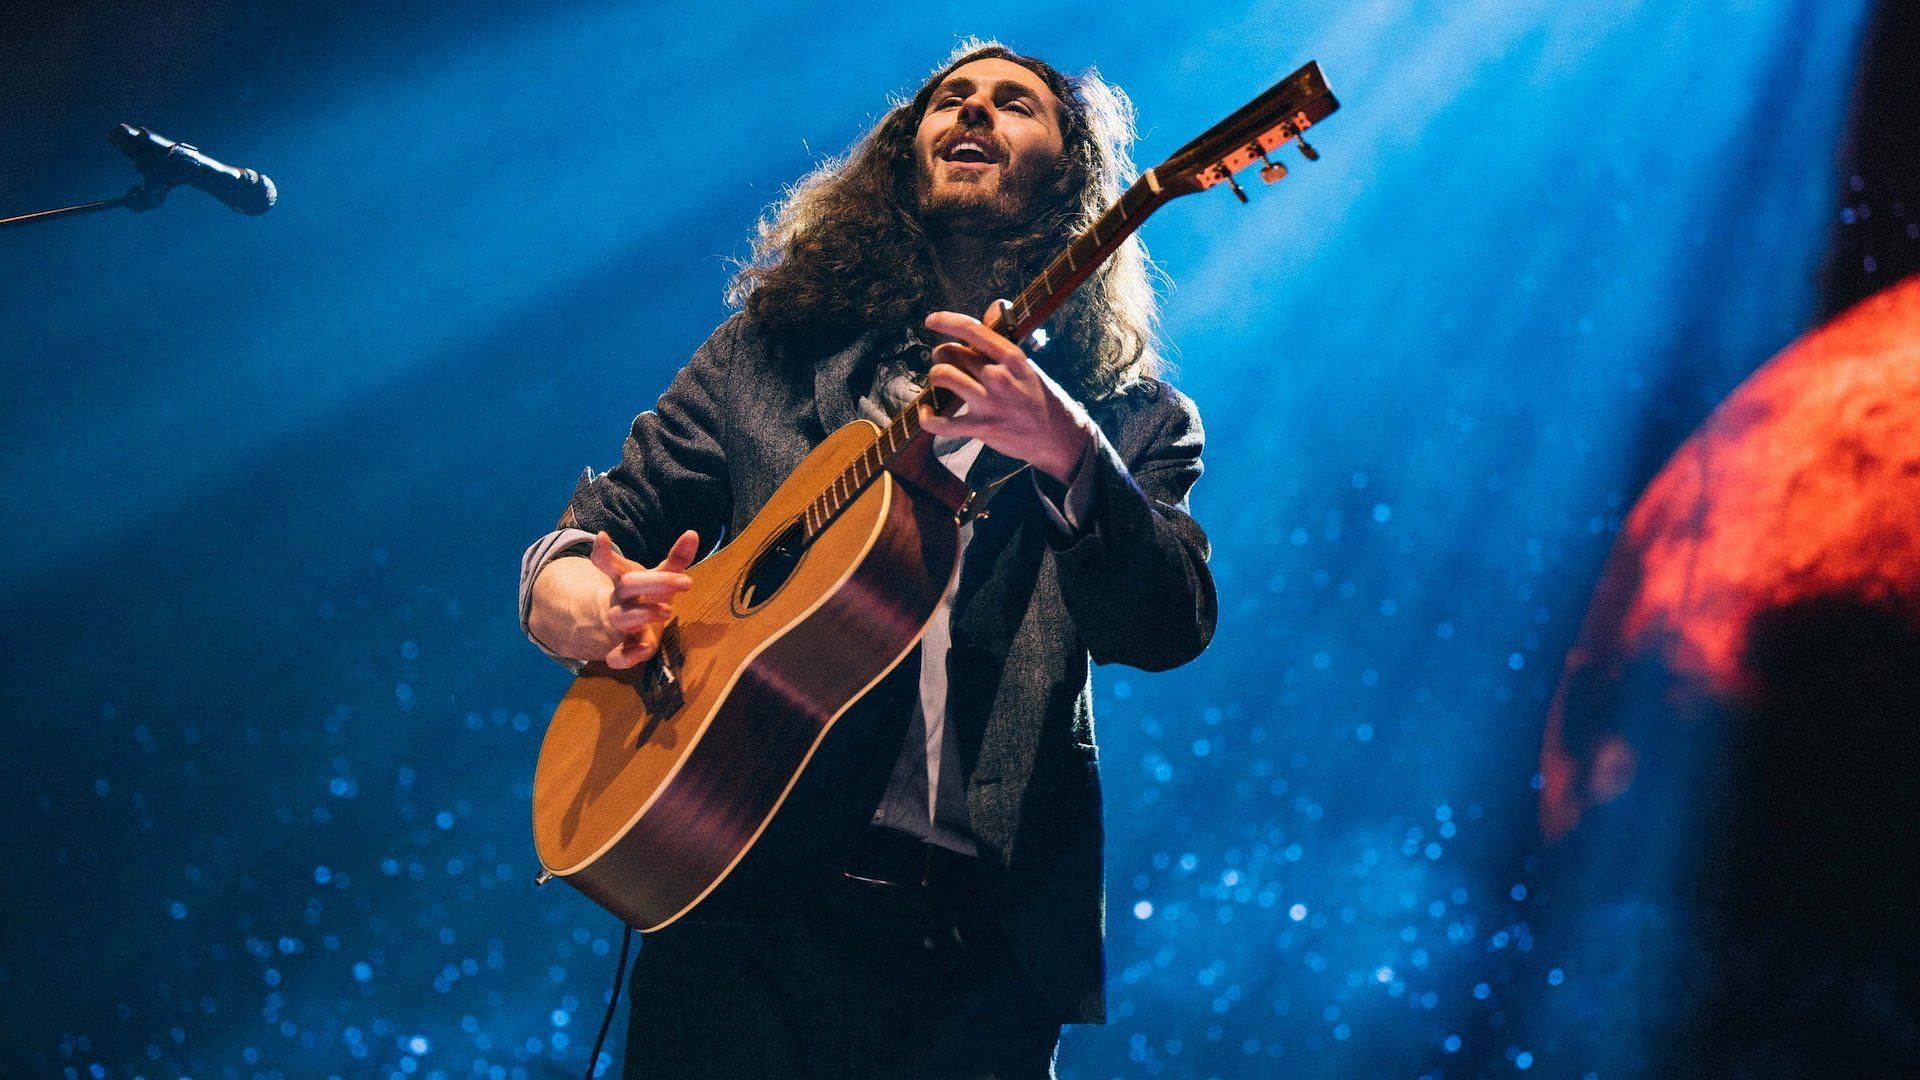 Hozier performing at the Belfast Arena on his Unreal Unearth tour (Image via X/@Hozier)